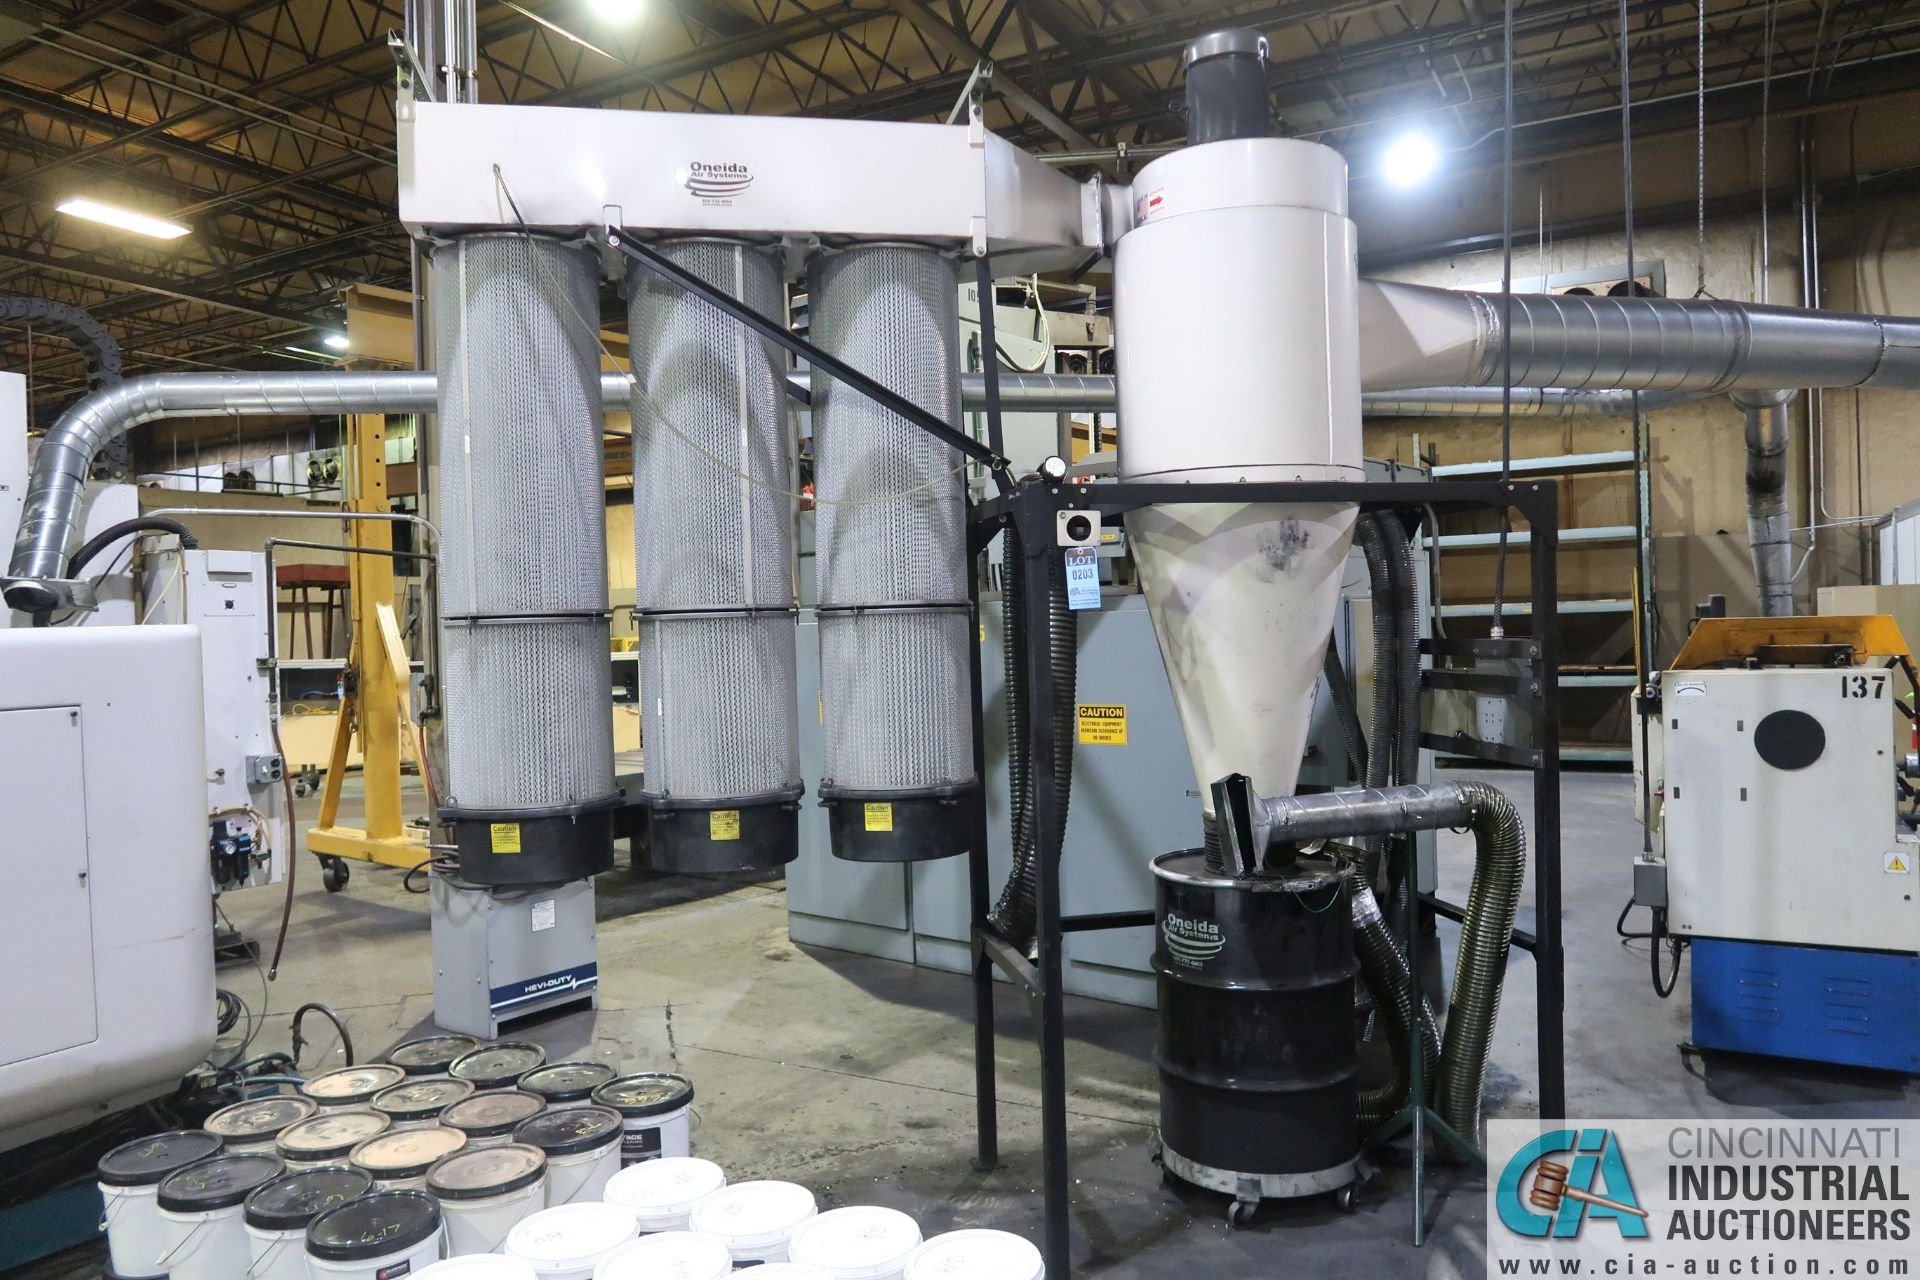 ONEIDA TRIPLE FILTER BOTTOM DISCHARGE DUST COLLECTOR SYSTEM